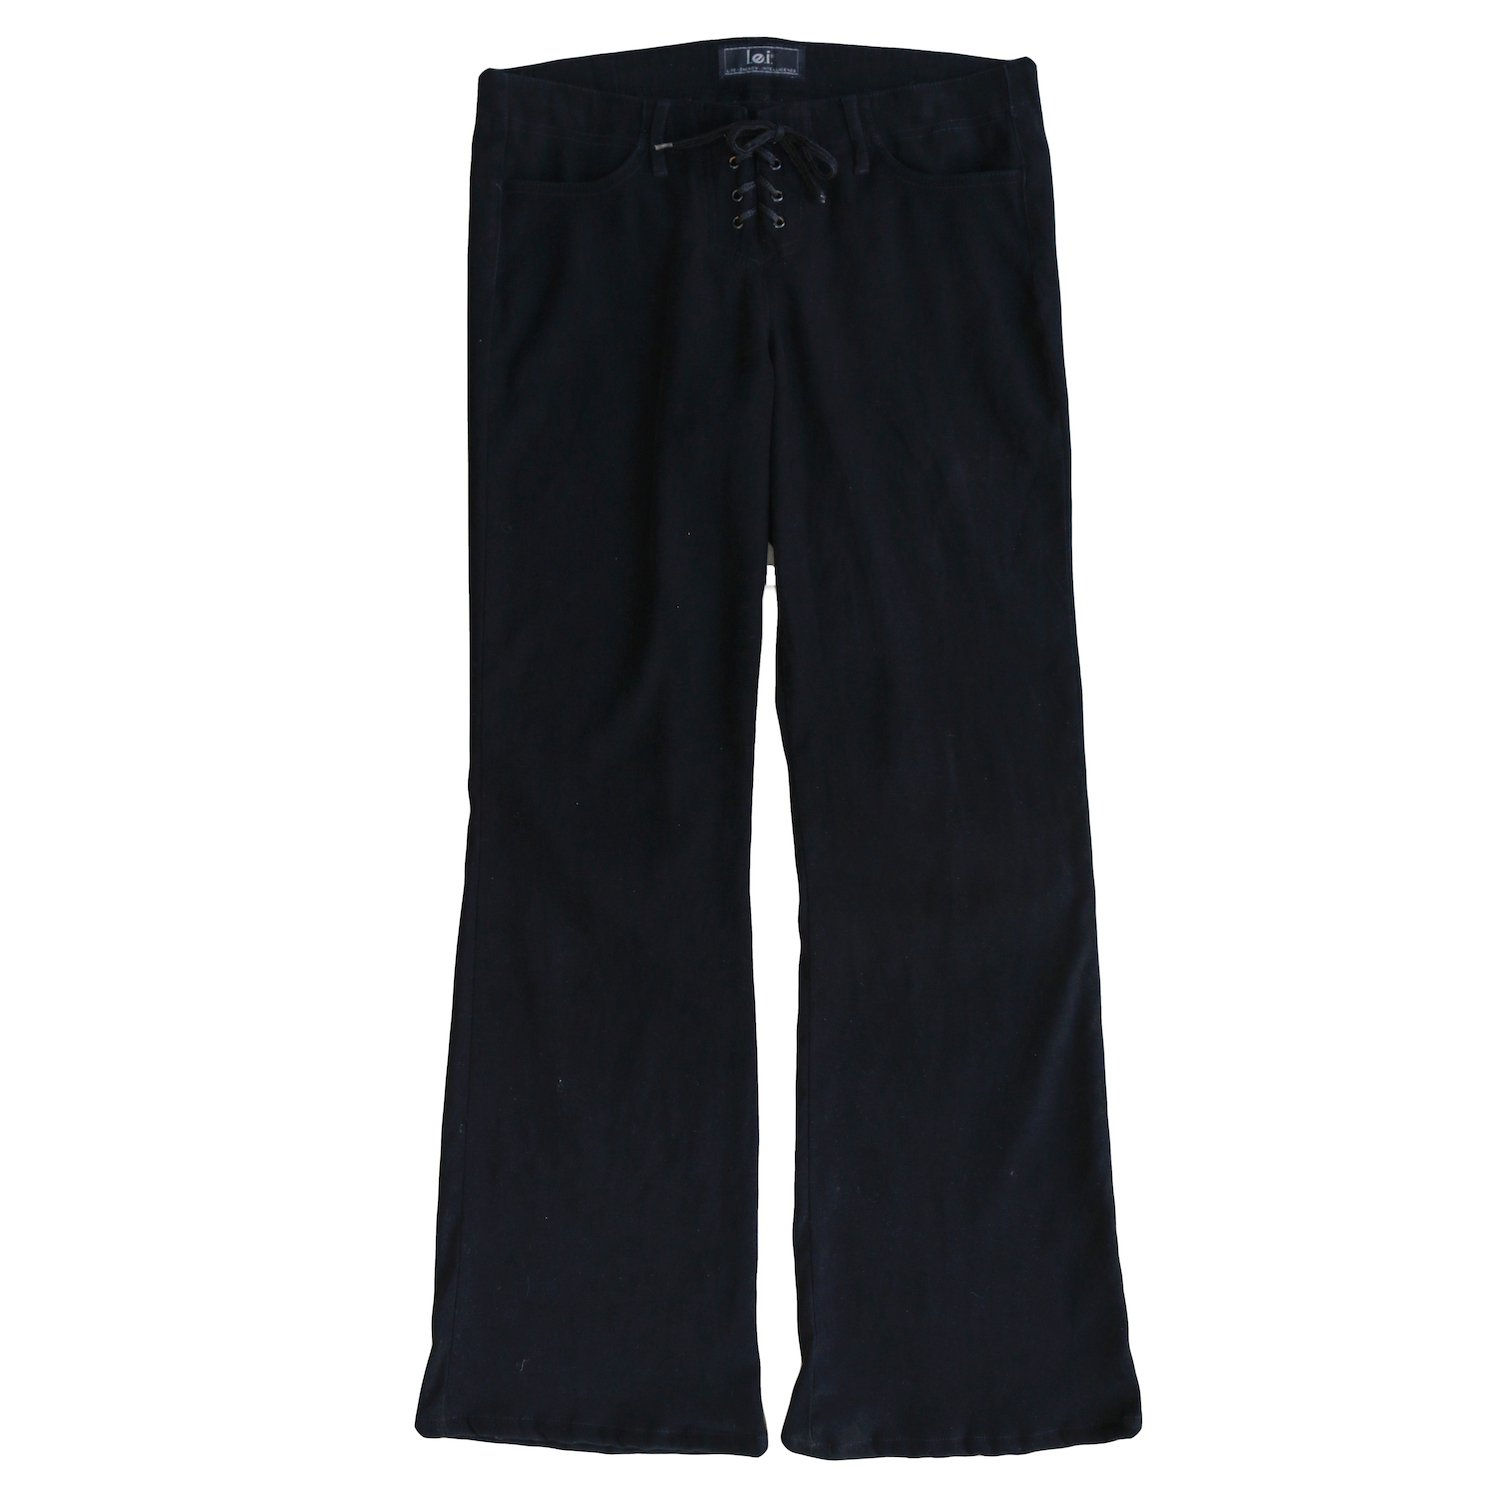 <img class='new_mark_img1' src='https://img.shop-pro.jp/img/new/icons8.gif' style='border:none;display:inline;margin:0px;padding:0px;width:auto;' />Vintage Clothes / 90's Flared pants